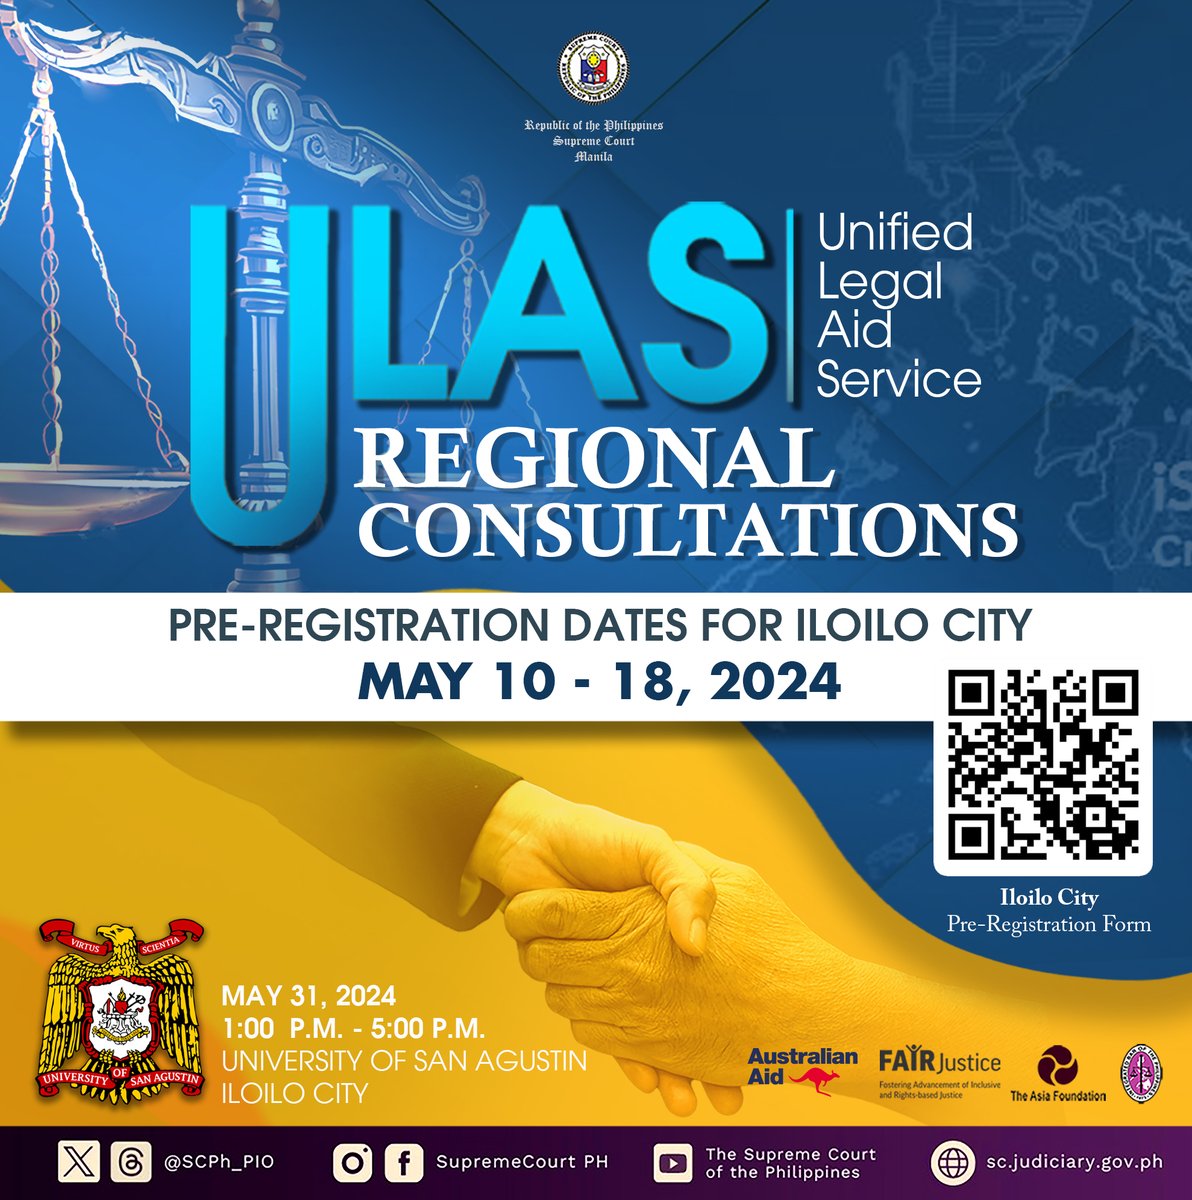 The Supreme Court will be conducting the last leg of the ULAS Regional Consultations on May 31, 2024 at the University of San Agustin, Iloilo City. To pre-register, you may scan the QR code anytime from May 10 to 18, 2024. #ULASRegionalConsultations